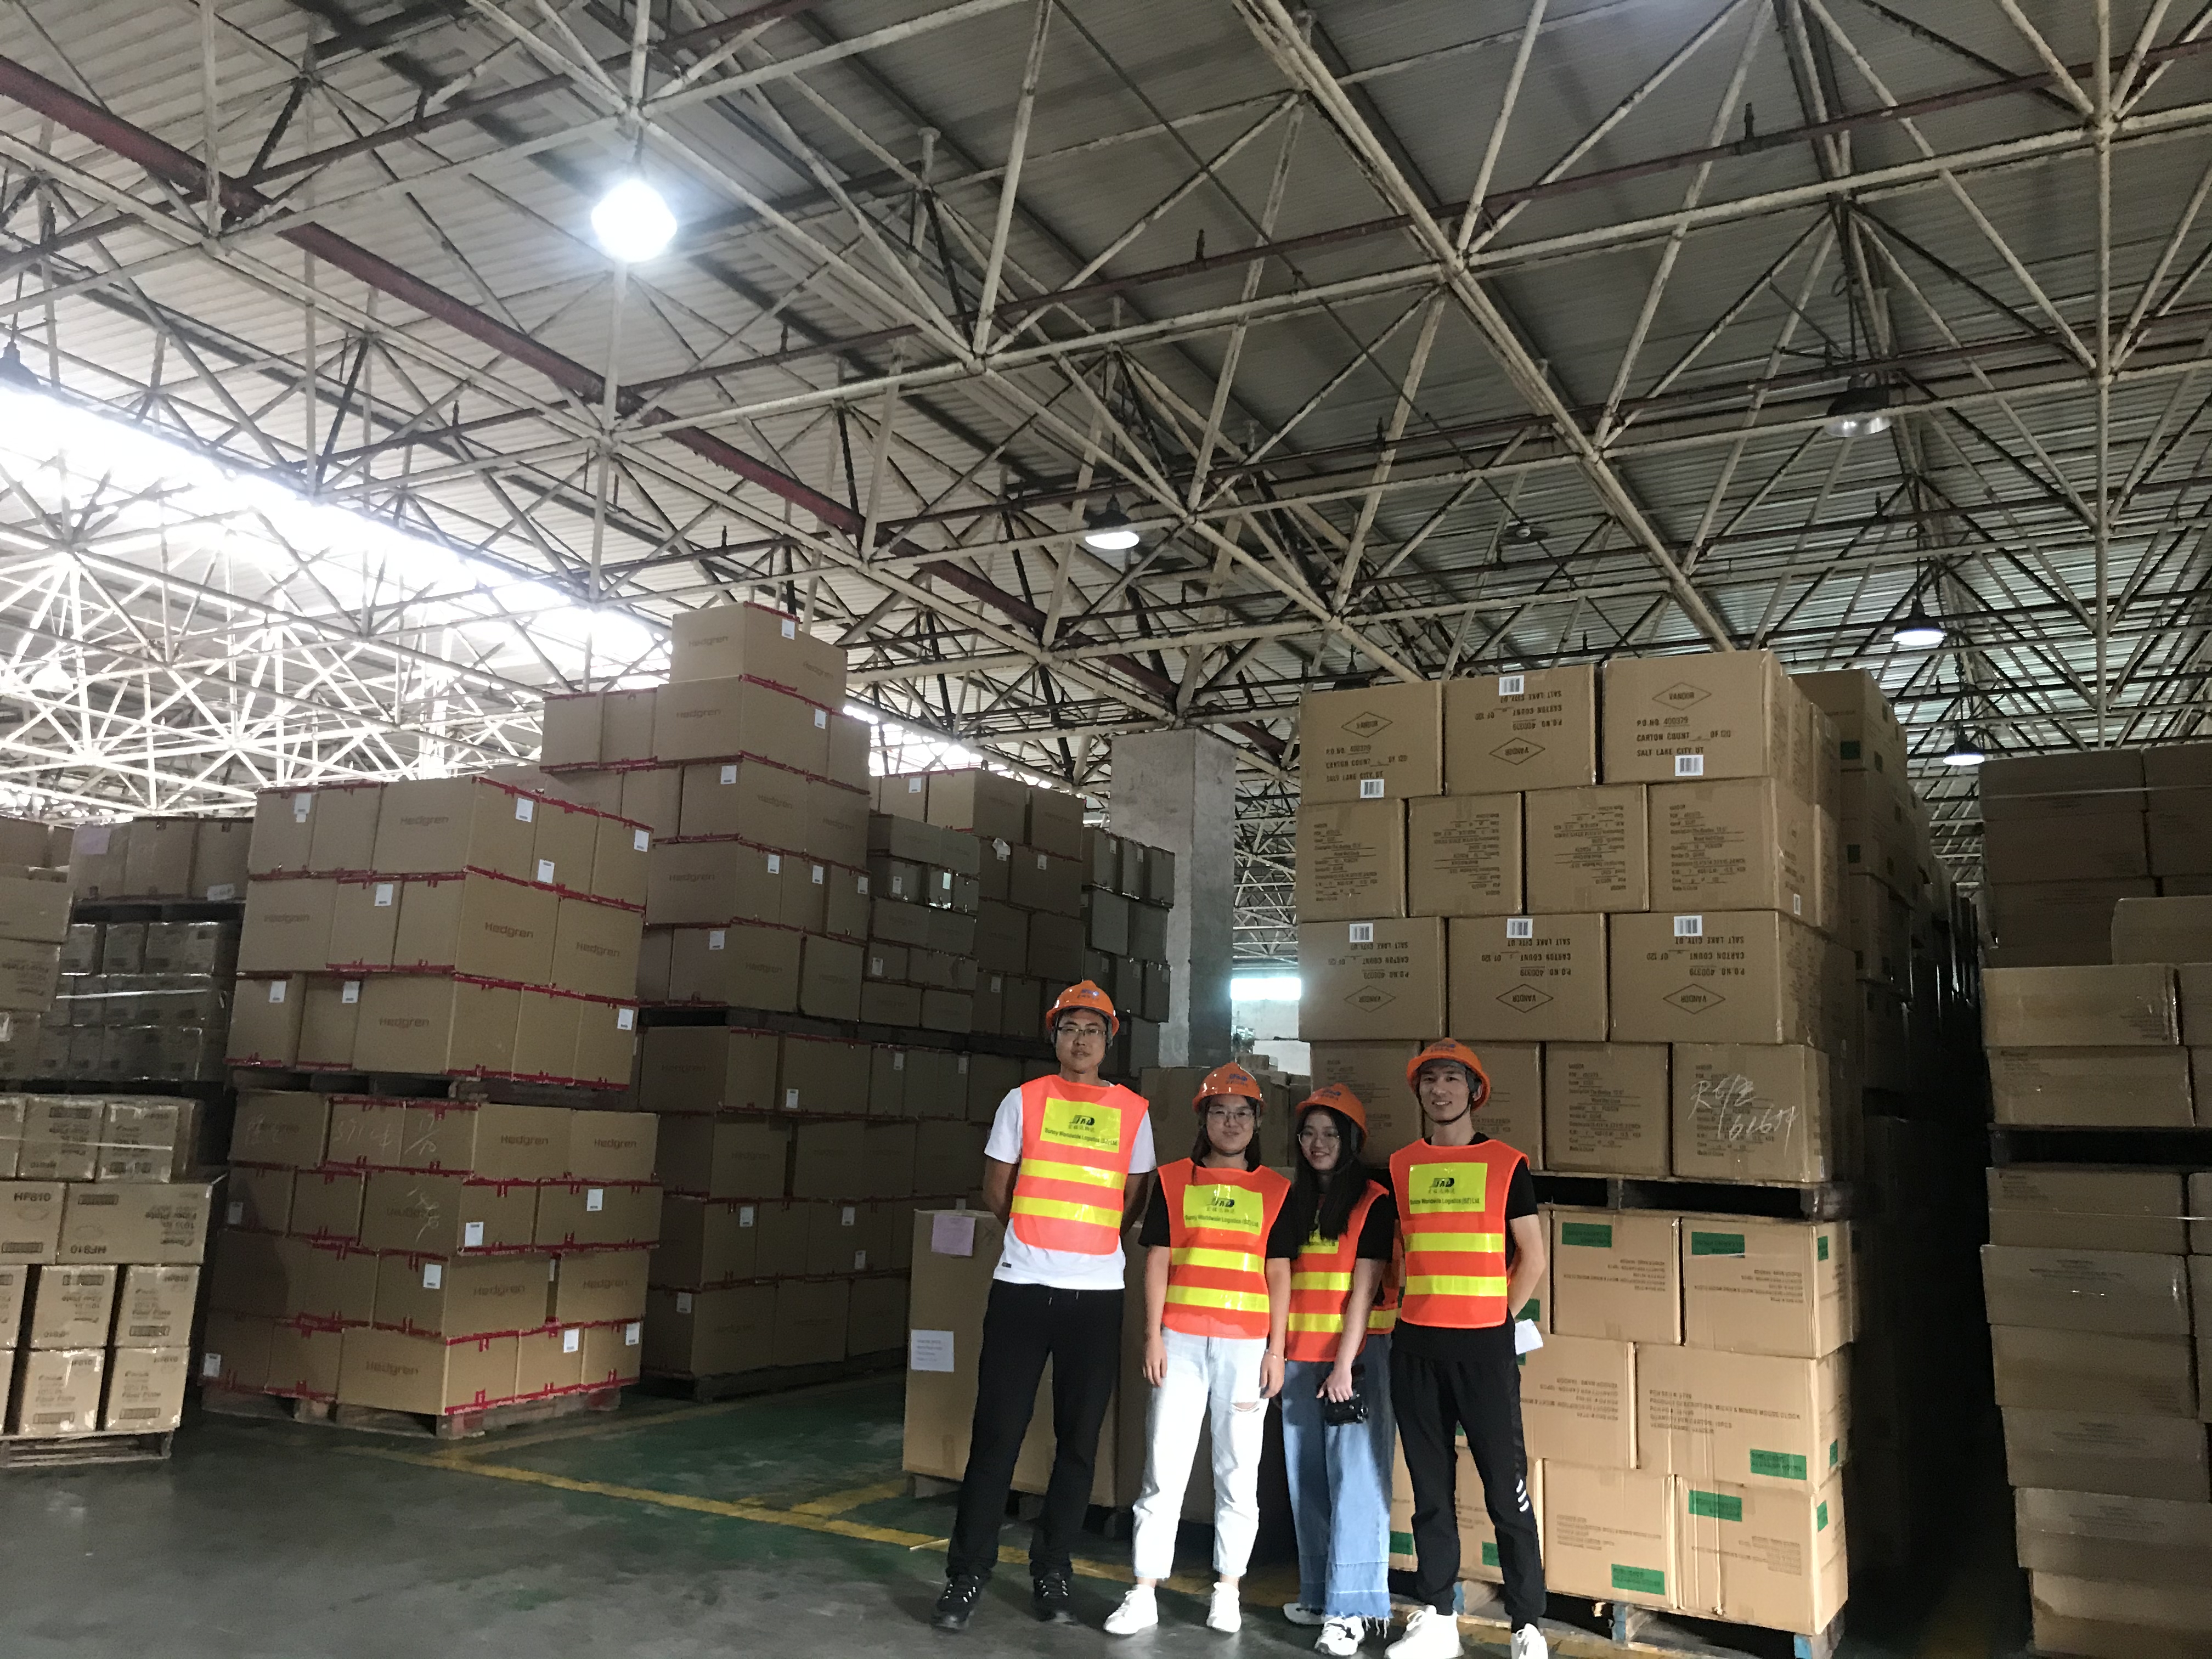 Consolidation warehouse cargo shipping from Guangzhou Shenzhen to Philippines, Sunny Worldwide Logistics